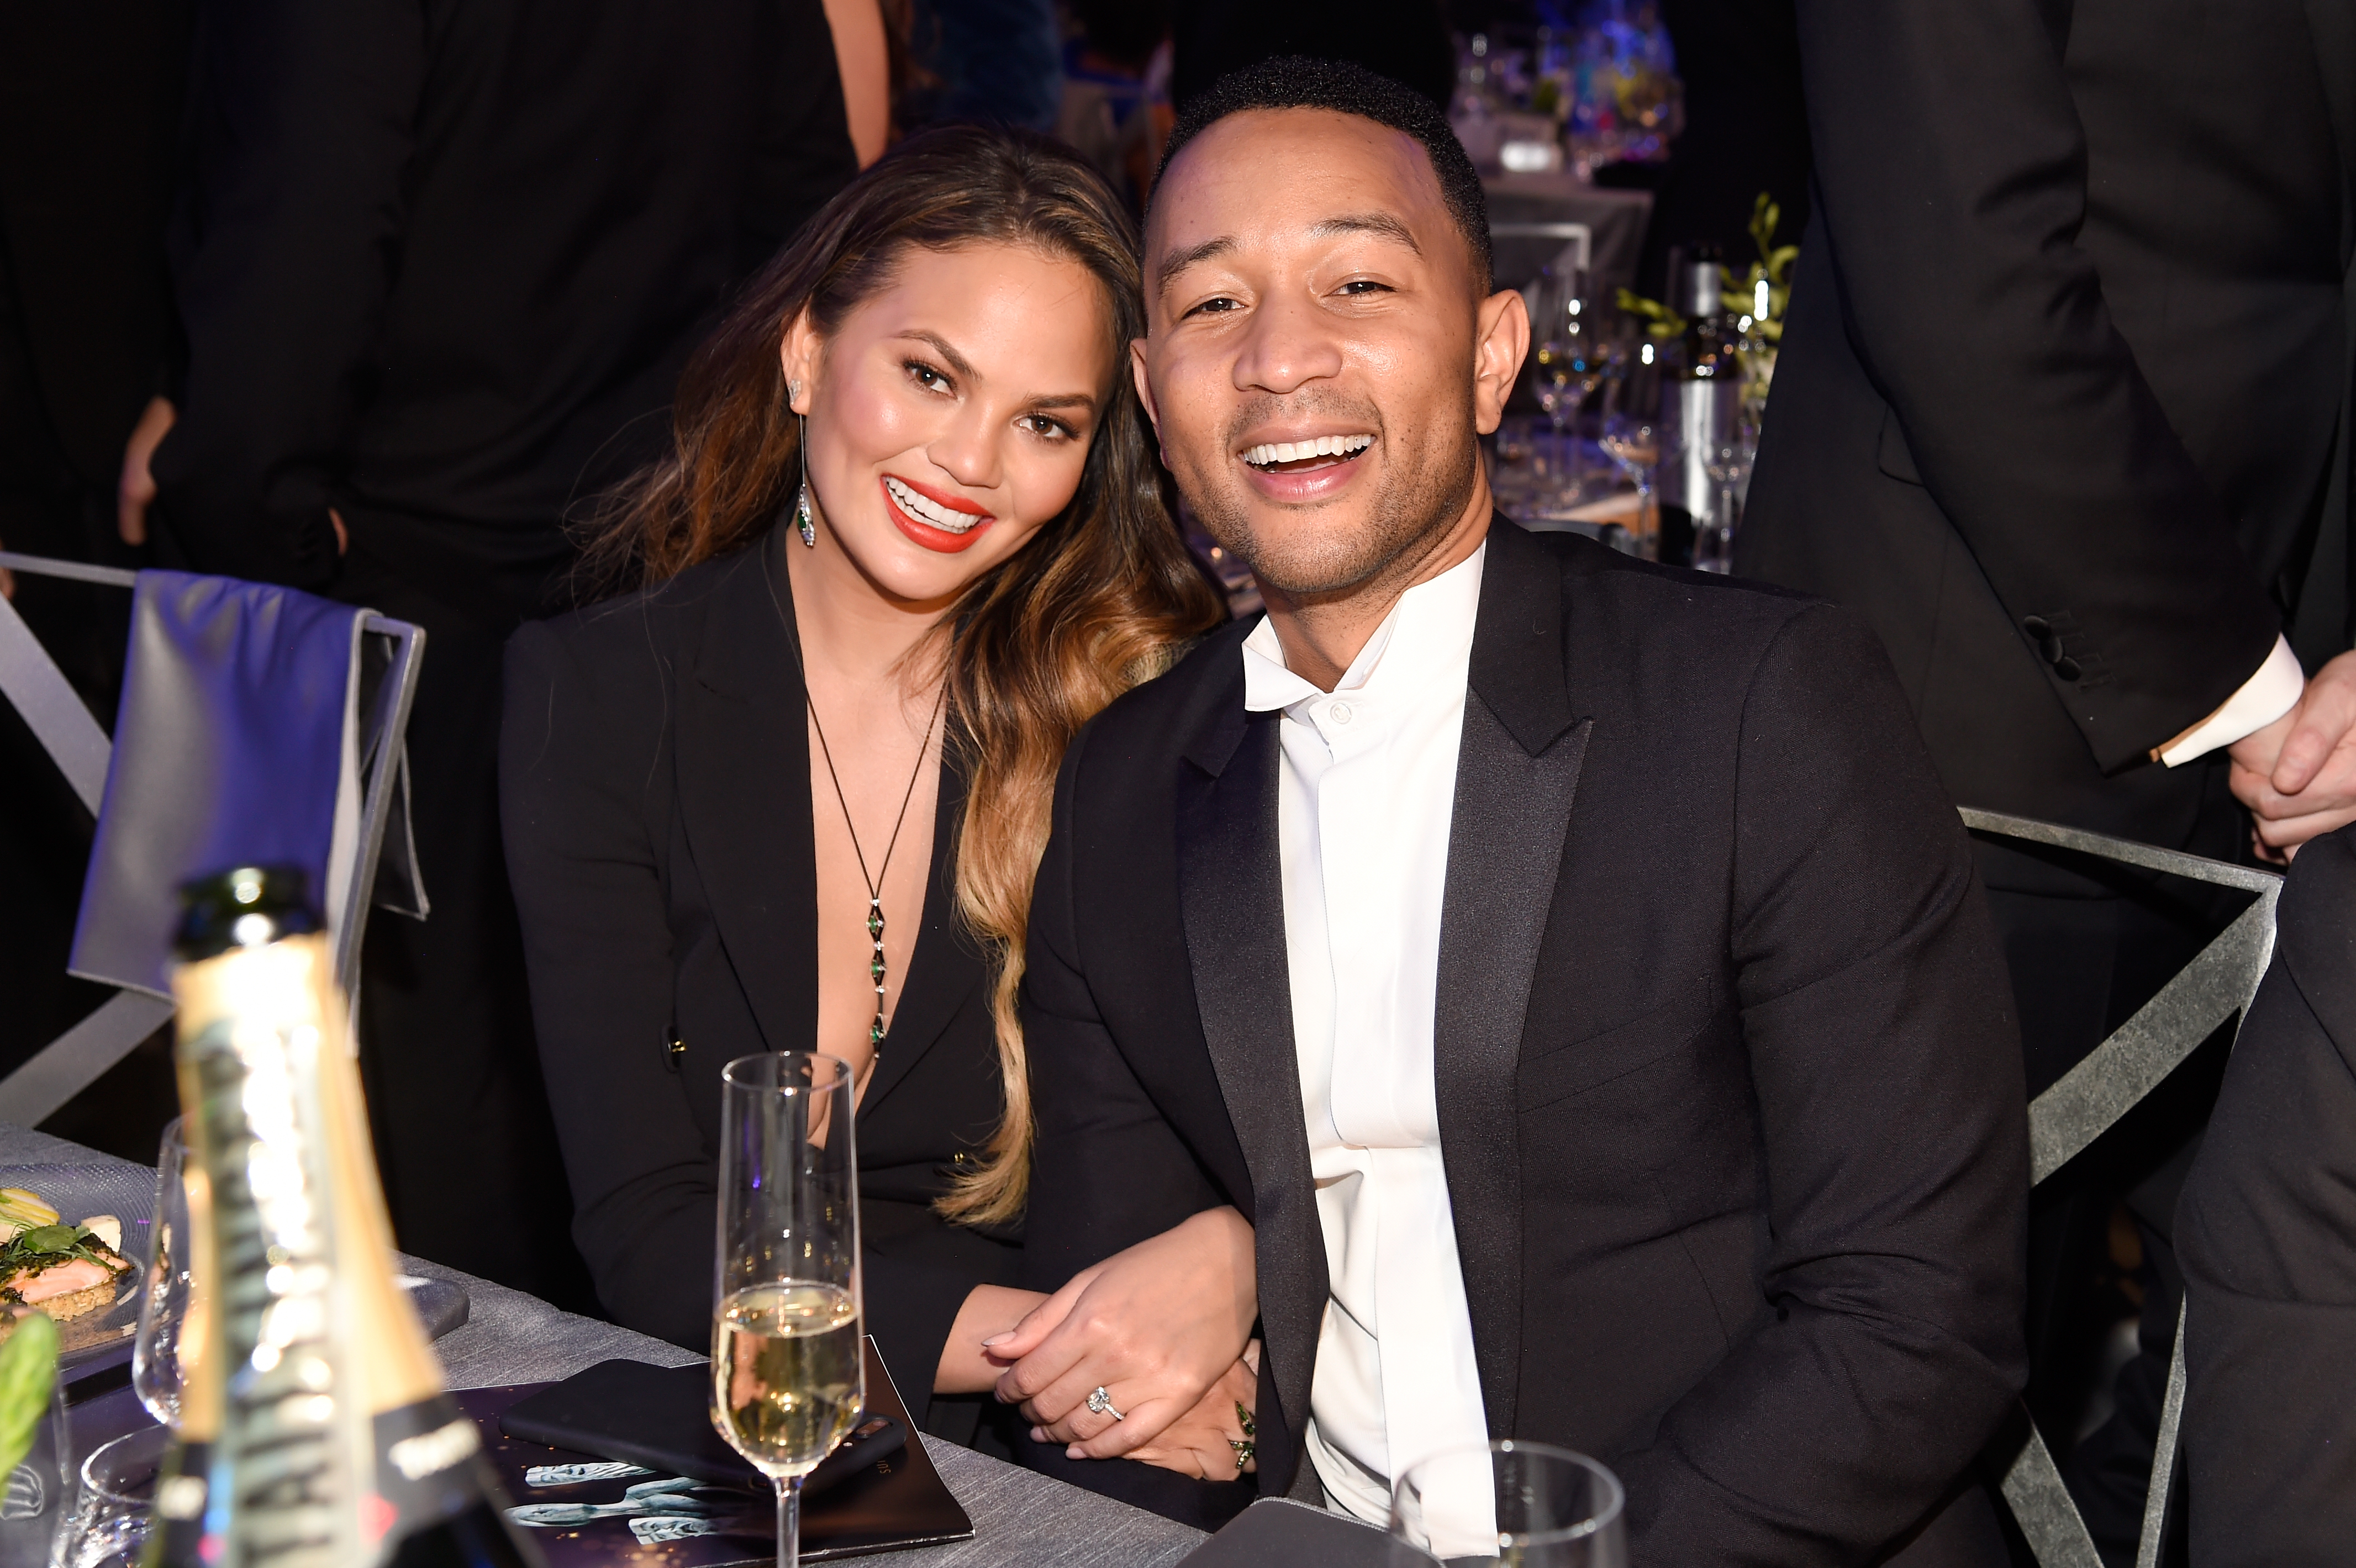 Chrissy Teigen (L) and artist John Legend during The 23rd Annual Screen Actors Guild Awards at The Shrine Auditorium on January 29, 2017 in Los Angeles, California. (Kevin Mazur—Getty Images for TNT)